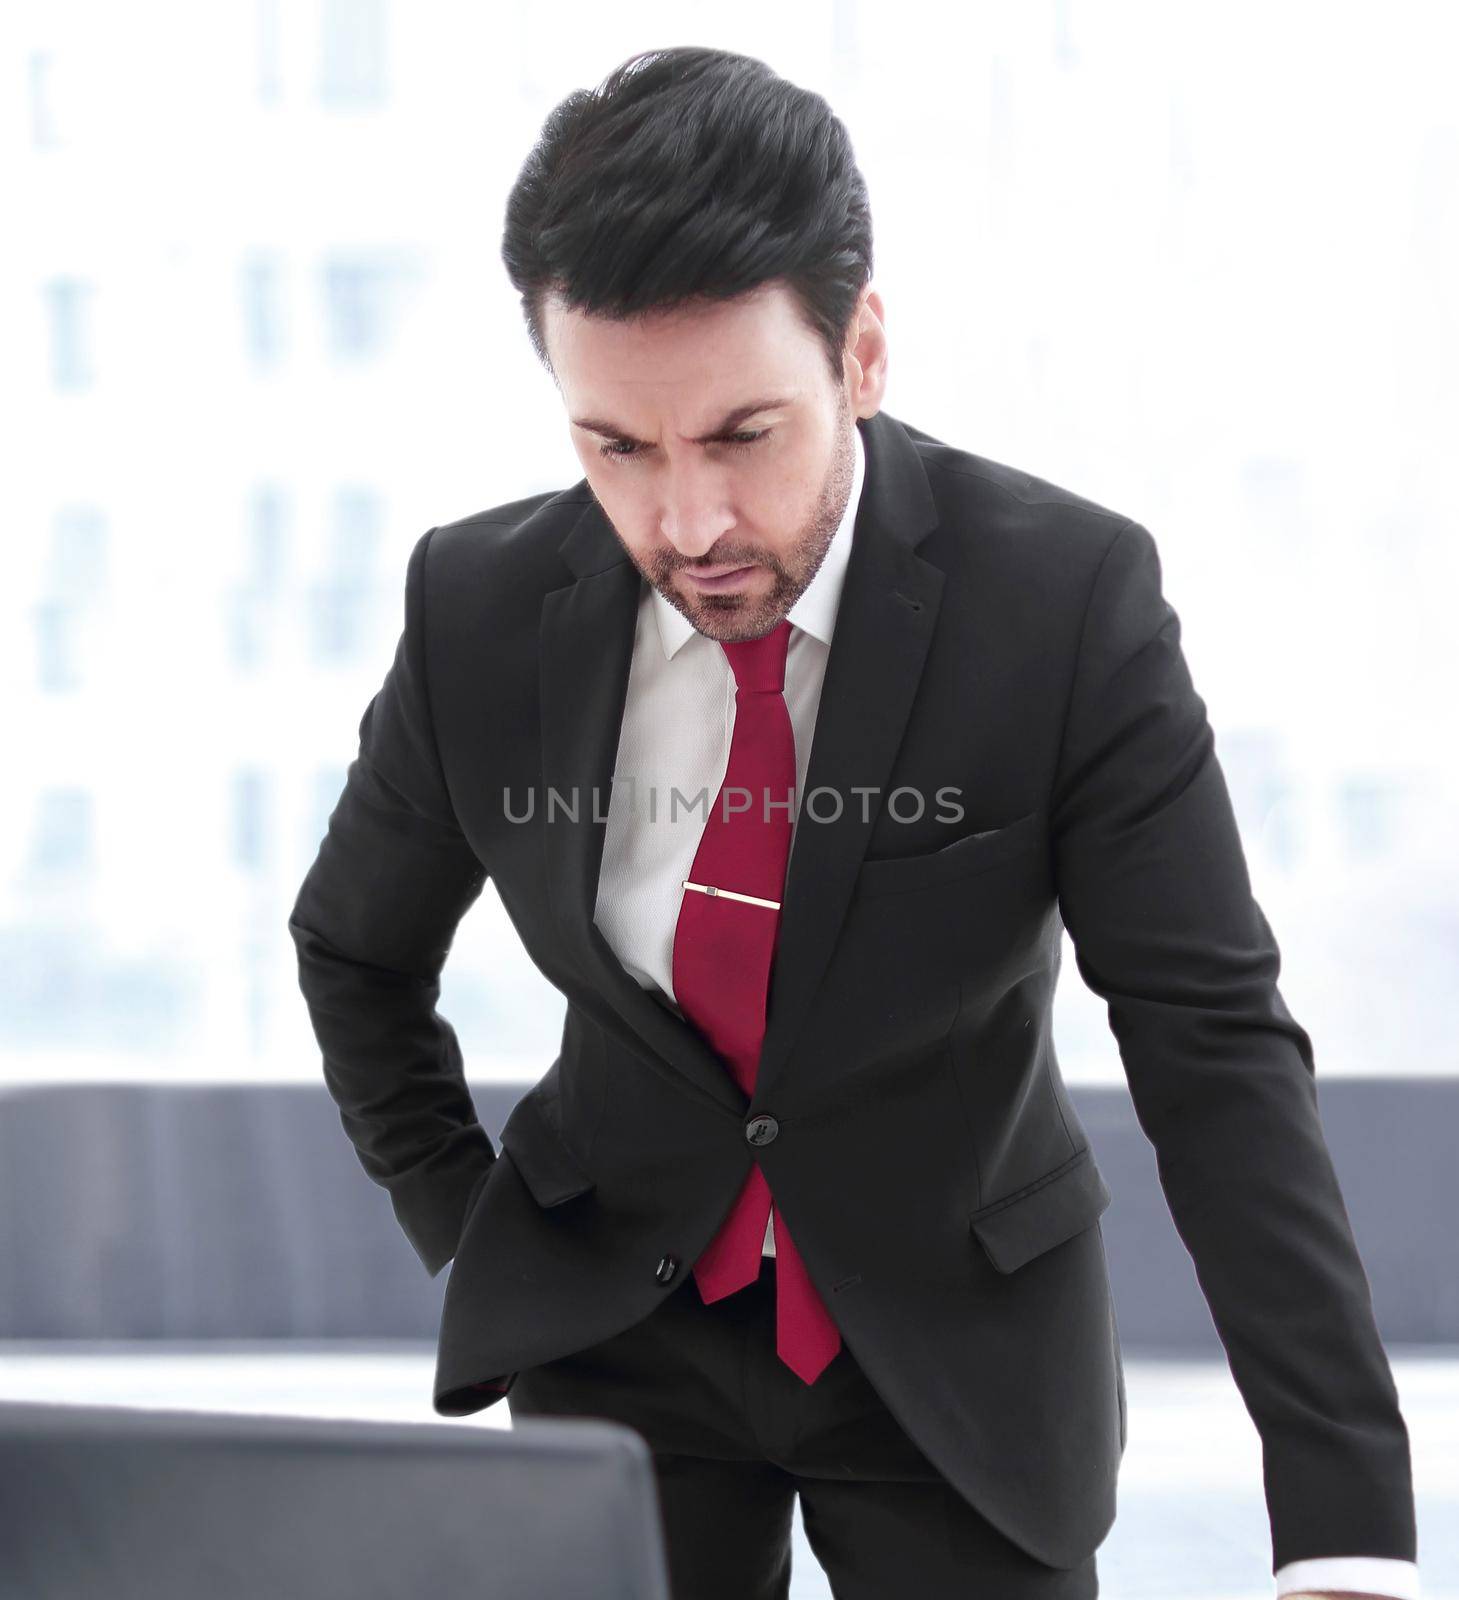 Businessman standing at his Desk and looking at the laptop screen by asdf